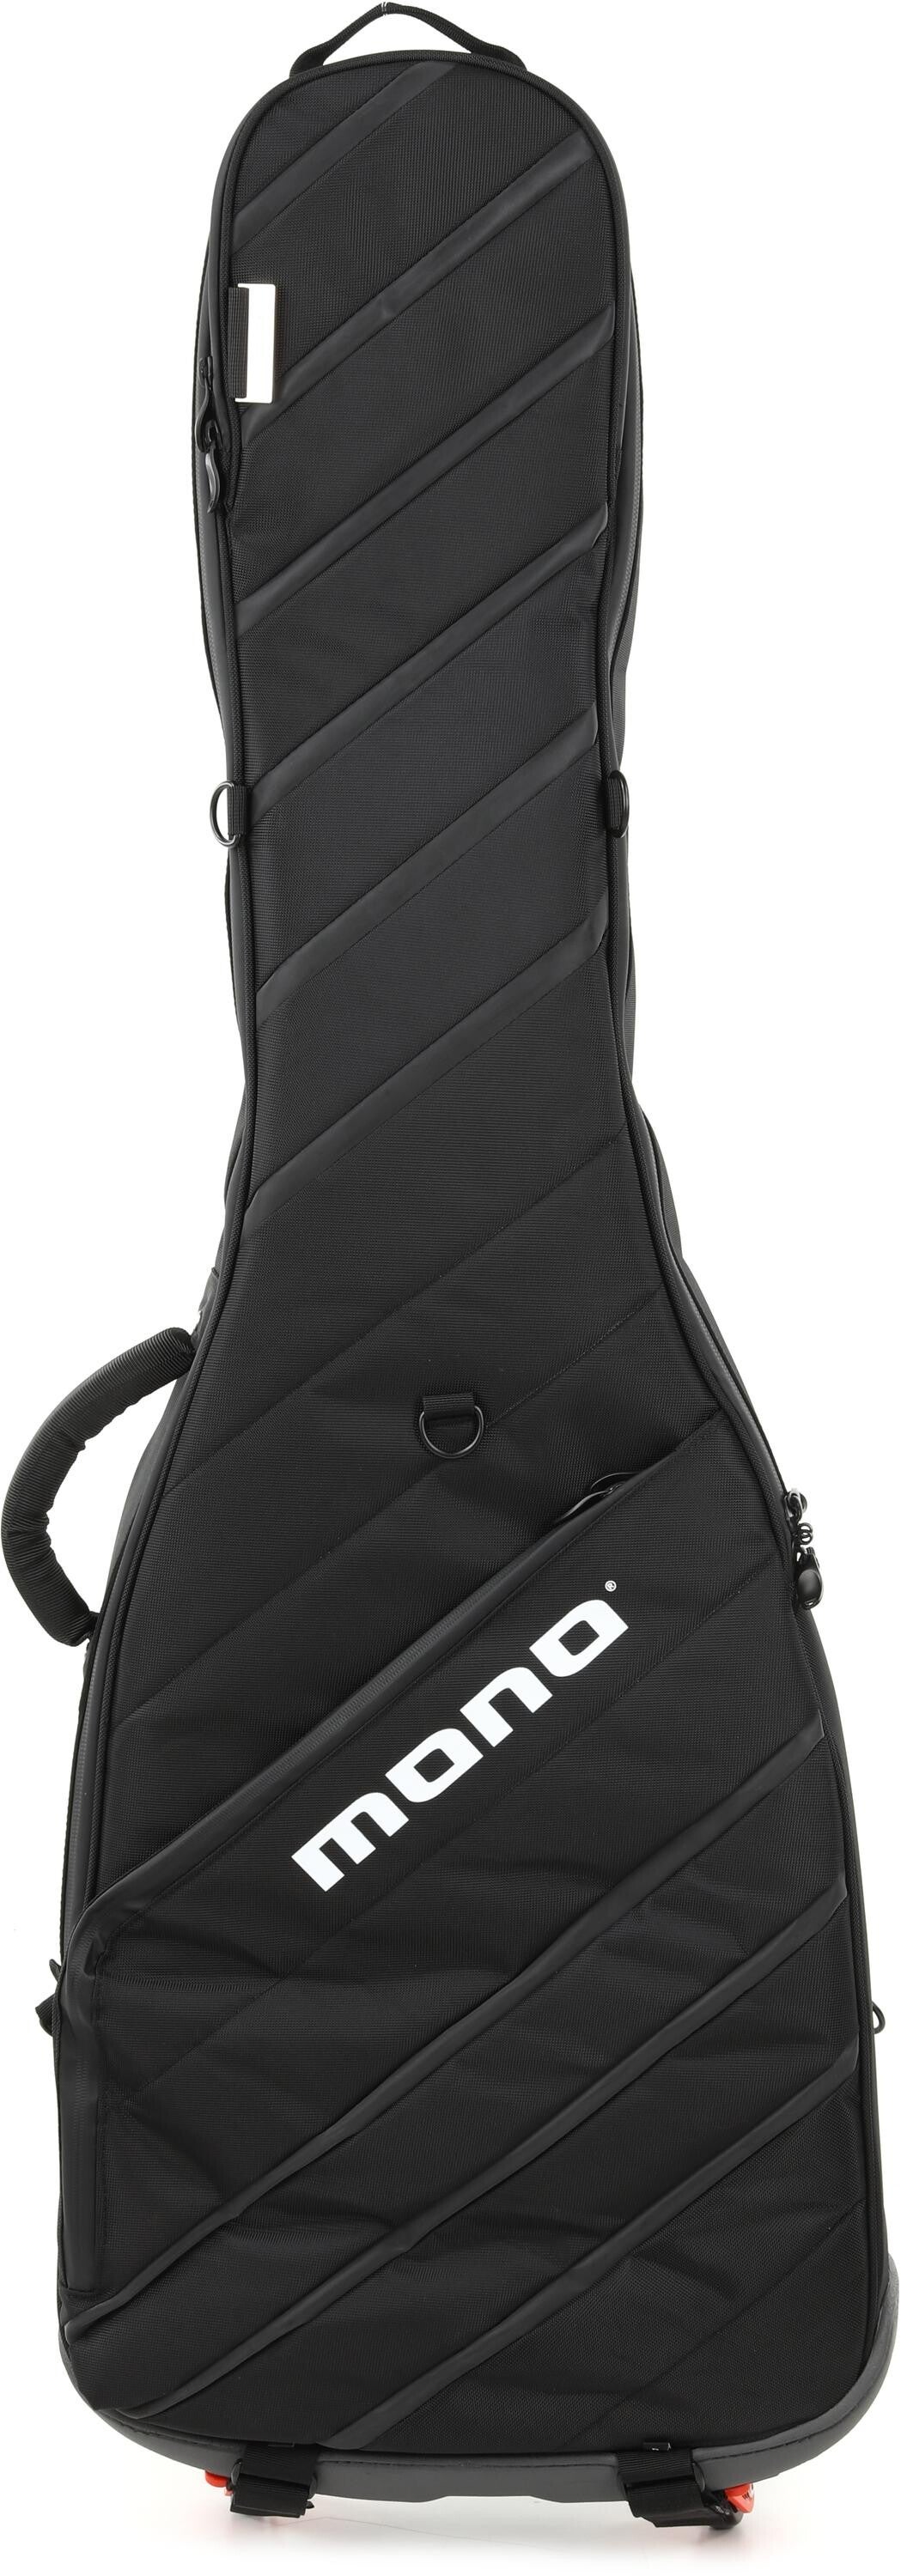 On-Stage GHB7550CG Hybrid Electric Bass Guitar Gig Bag - Charcoal Gray -  Terry Carter Music Store